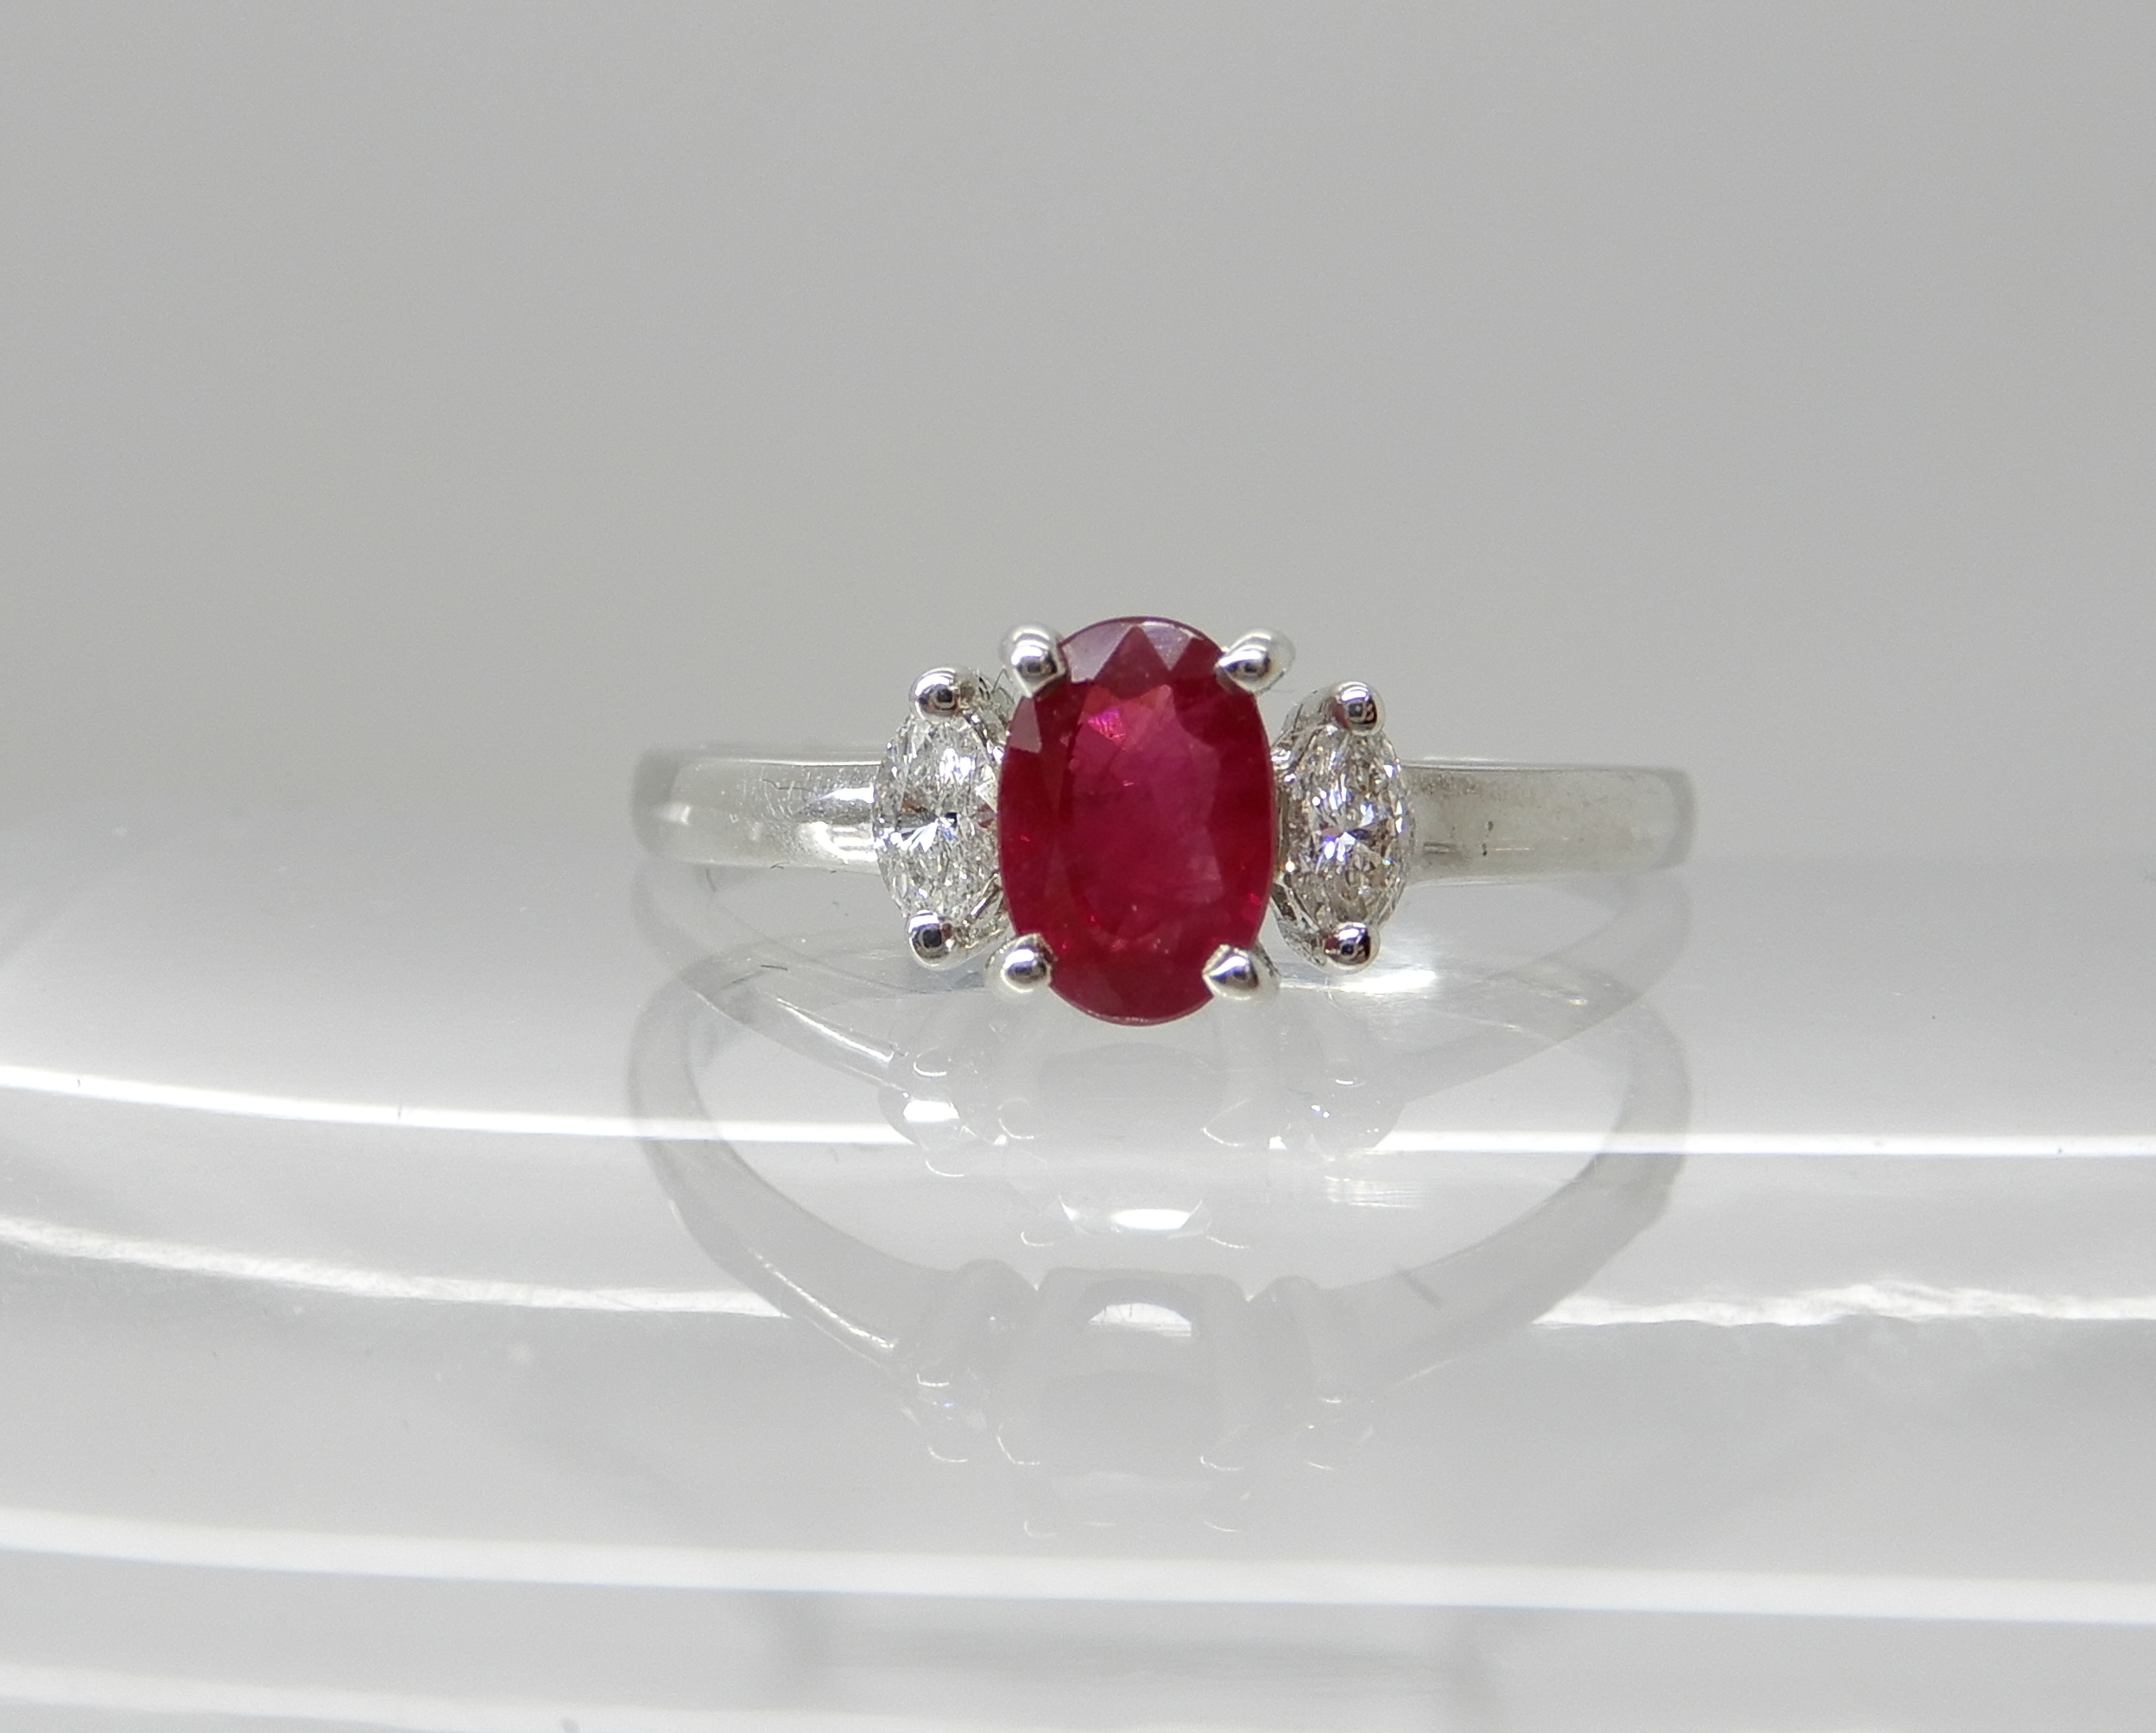 An 18ct white gold ruby and diamond ring, dimensions of the ruby 5.9mm x 4mm x 3.1mm, with marquis